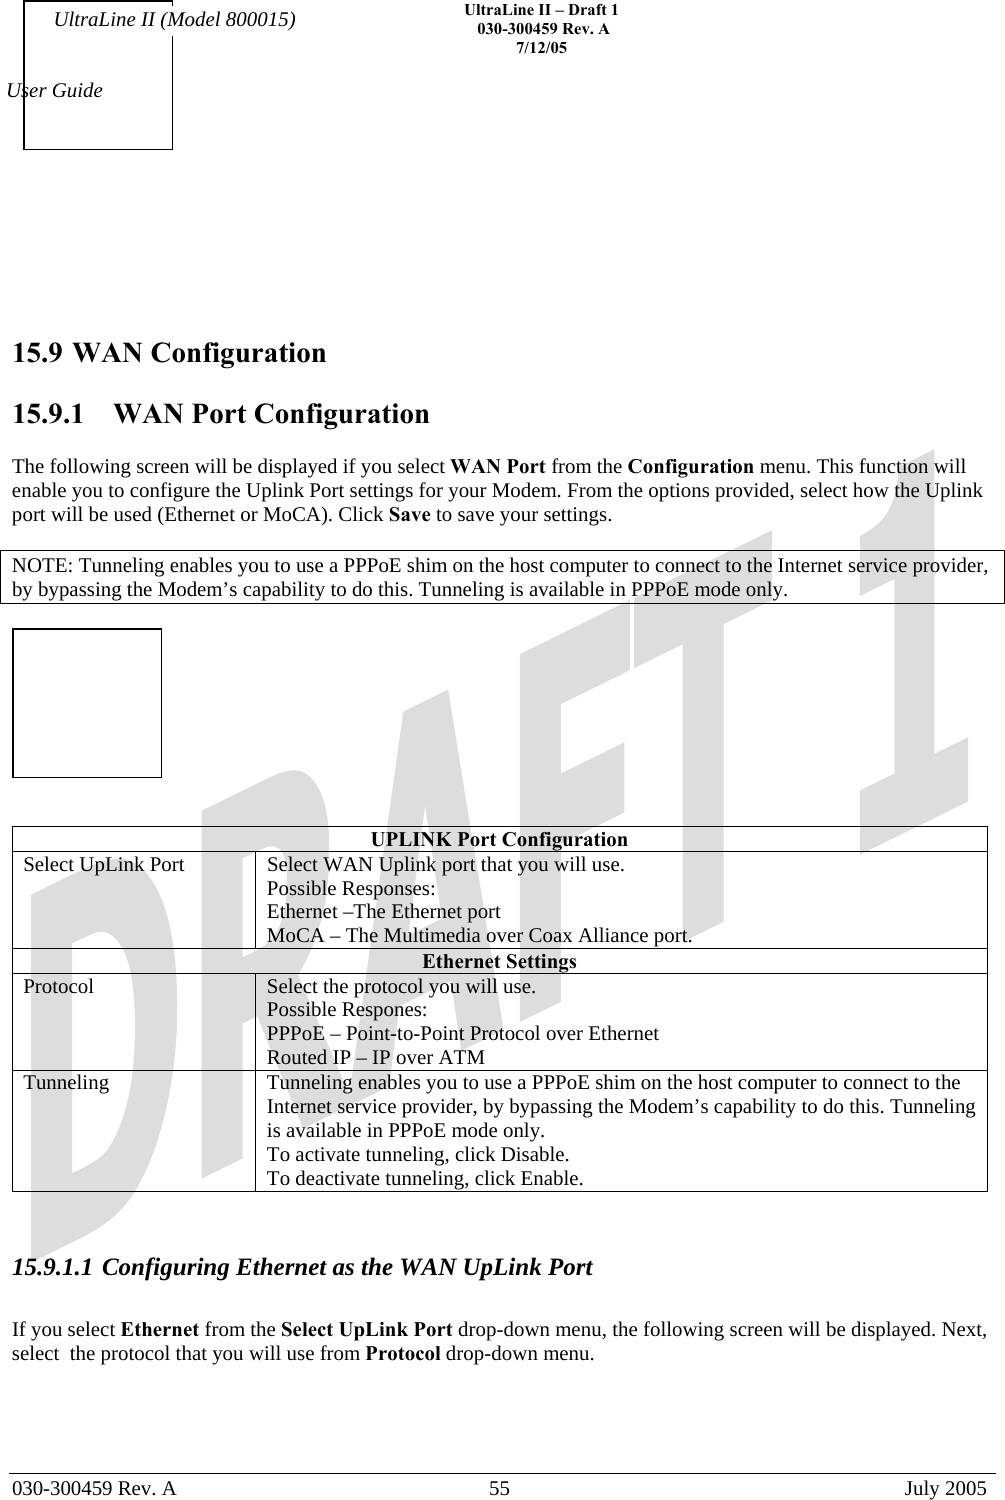    UltraLine II – Draft 1   030-300459 Rev. A 7/12/05   030-300459 Rev. A  55  July 2005  User Guide UltraLine II (Model 800015)     15.9 WAN Configuration  15.9.1   WAN Port Configuration  The following screen will be displayed if you select WAN Port from the Configuration menu. This function will enable you to configure the Uplink Port settings for your Modem. From the options provided, select how the Uplink port will be used (Ethernet or MoCA). Click Save to save your settings.  NOTE: Tunneling enables you to use a PPPoE shim on the host computer to connect to the Internet service provider, by bypassing the Modem’s capability to do this. Tunneling is available in PPPoE mode only.     UPLINK Port Configuration Select UpLink Port  Select WAN Uplink port that you will use. Possible Responses: Ethernet –The Ethernet port MoCA – The Multimedia over Coax Alliance port. Ethernet Settings Protocol  Select the protocol you will use. Possible Respones: PPPoE – Point-to-Point Protocol over Ethernet Routed IP – IP over ATM Tunneling  Tunneling enables you to use a PPPoE shim on the host computer to connect to the Internet service provider, by bypassing the Modem’s capability to do this. Tunneling is available in PPPoE mode only. To activate tunneling, click Disable. To deactivate tunneling, click Enable.   15.9.1.1 Configuring Ethernet as the WAN UpLink Port   If you select Ethernet from the Select UpLink Port drop-down menu, the following screen will be displayed. Next, select  the protocol that you will use from Protocol drop-down menu.  